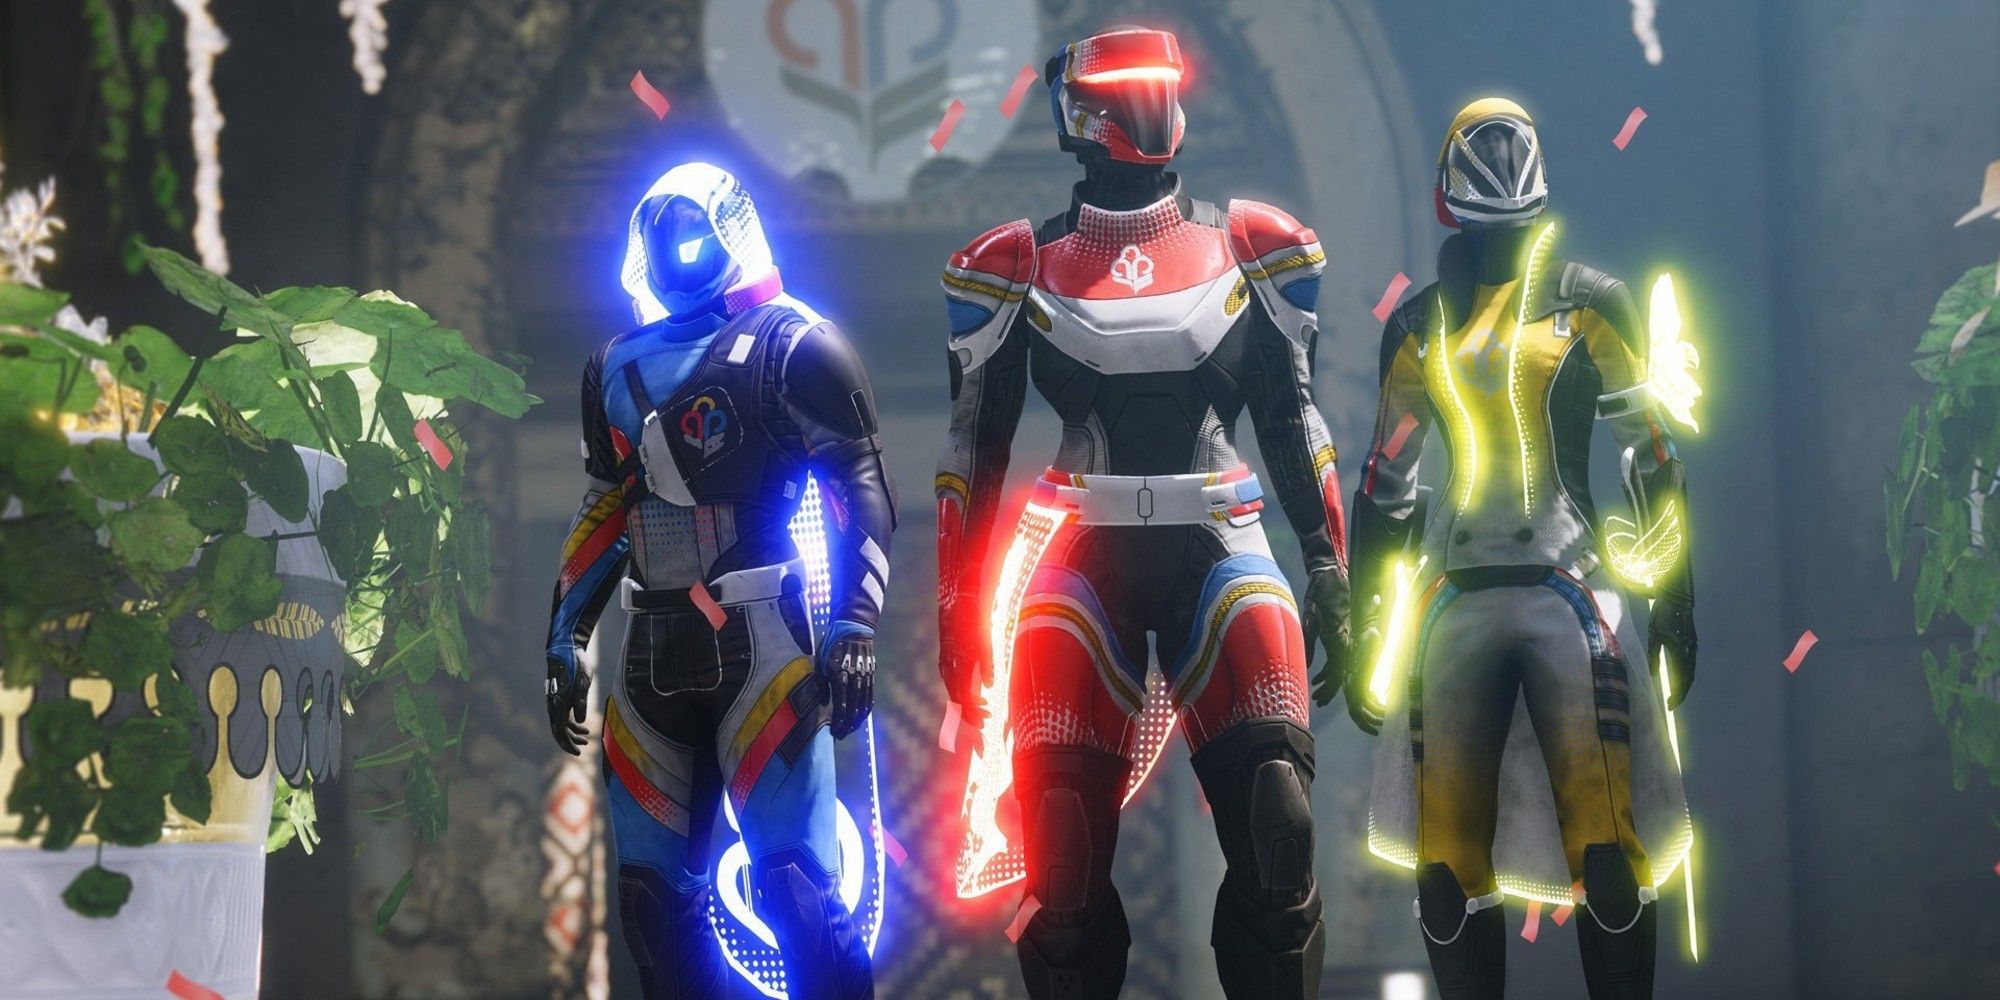 The three main classes compete in the Guardian Games in Destiny 2